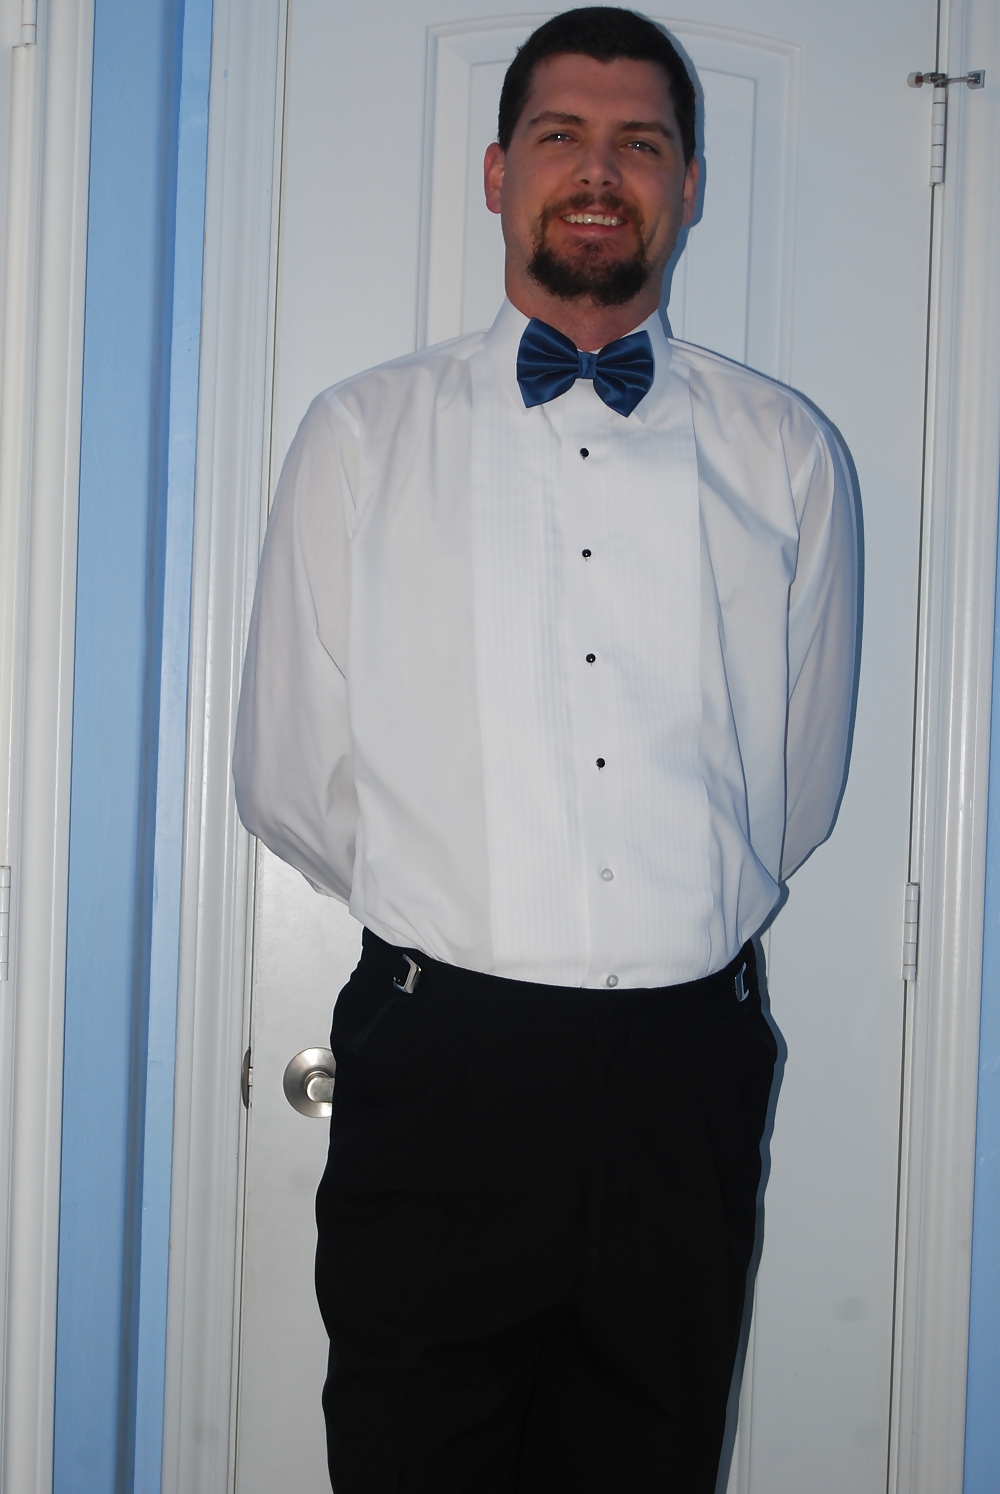 Free Pre-Christmast Party Photos in my tux photos